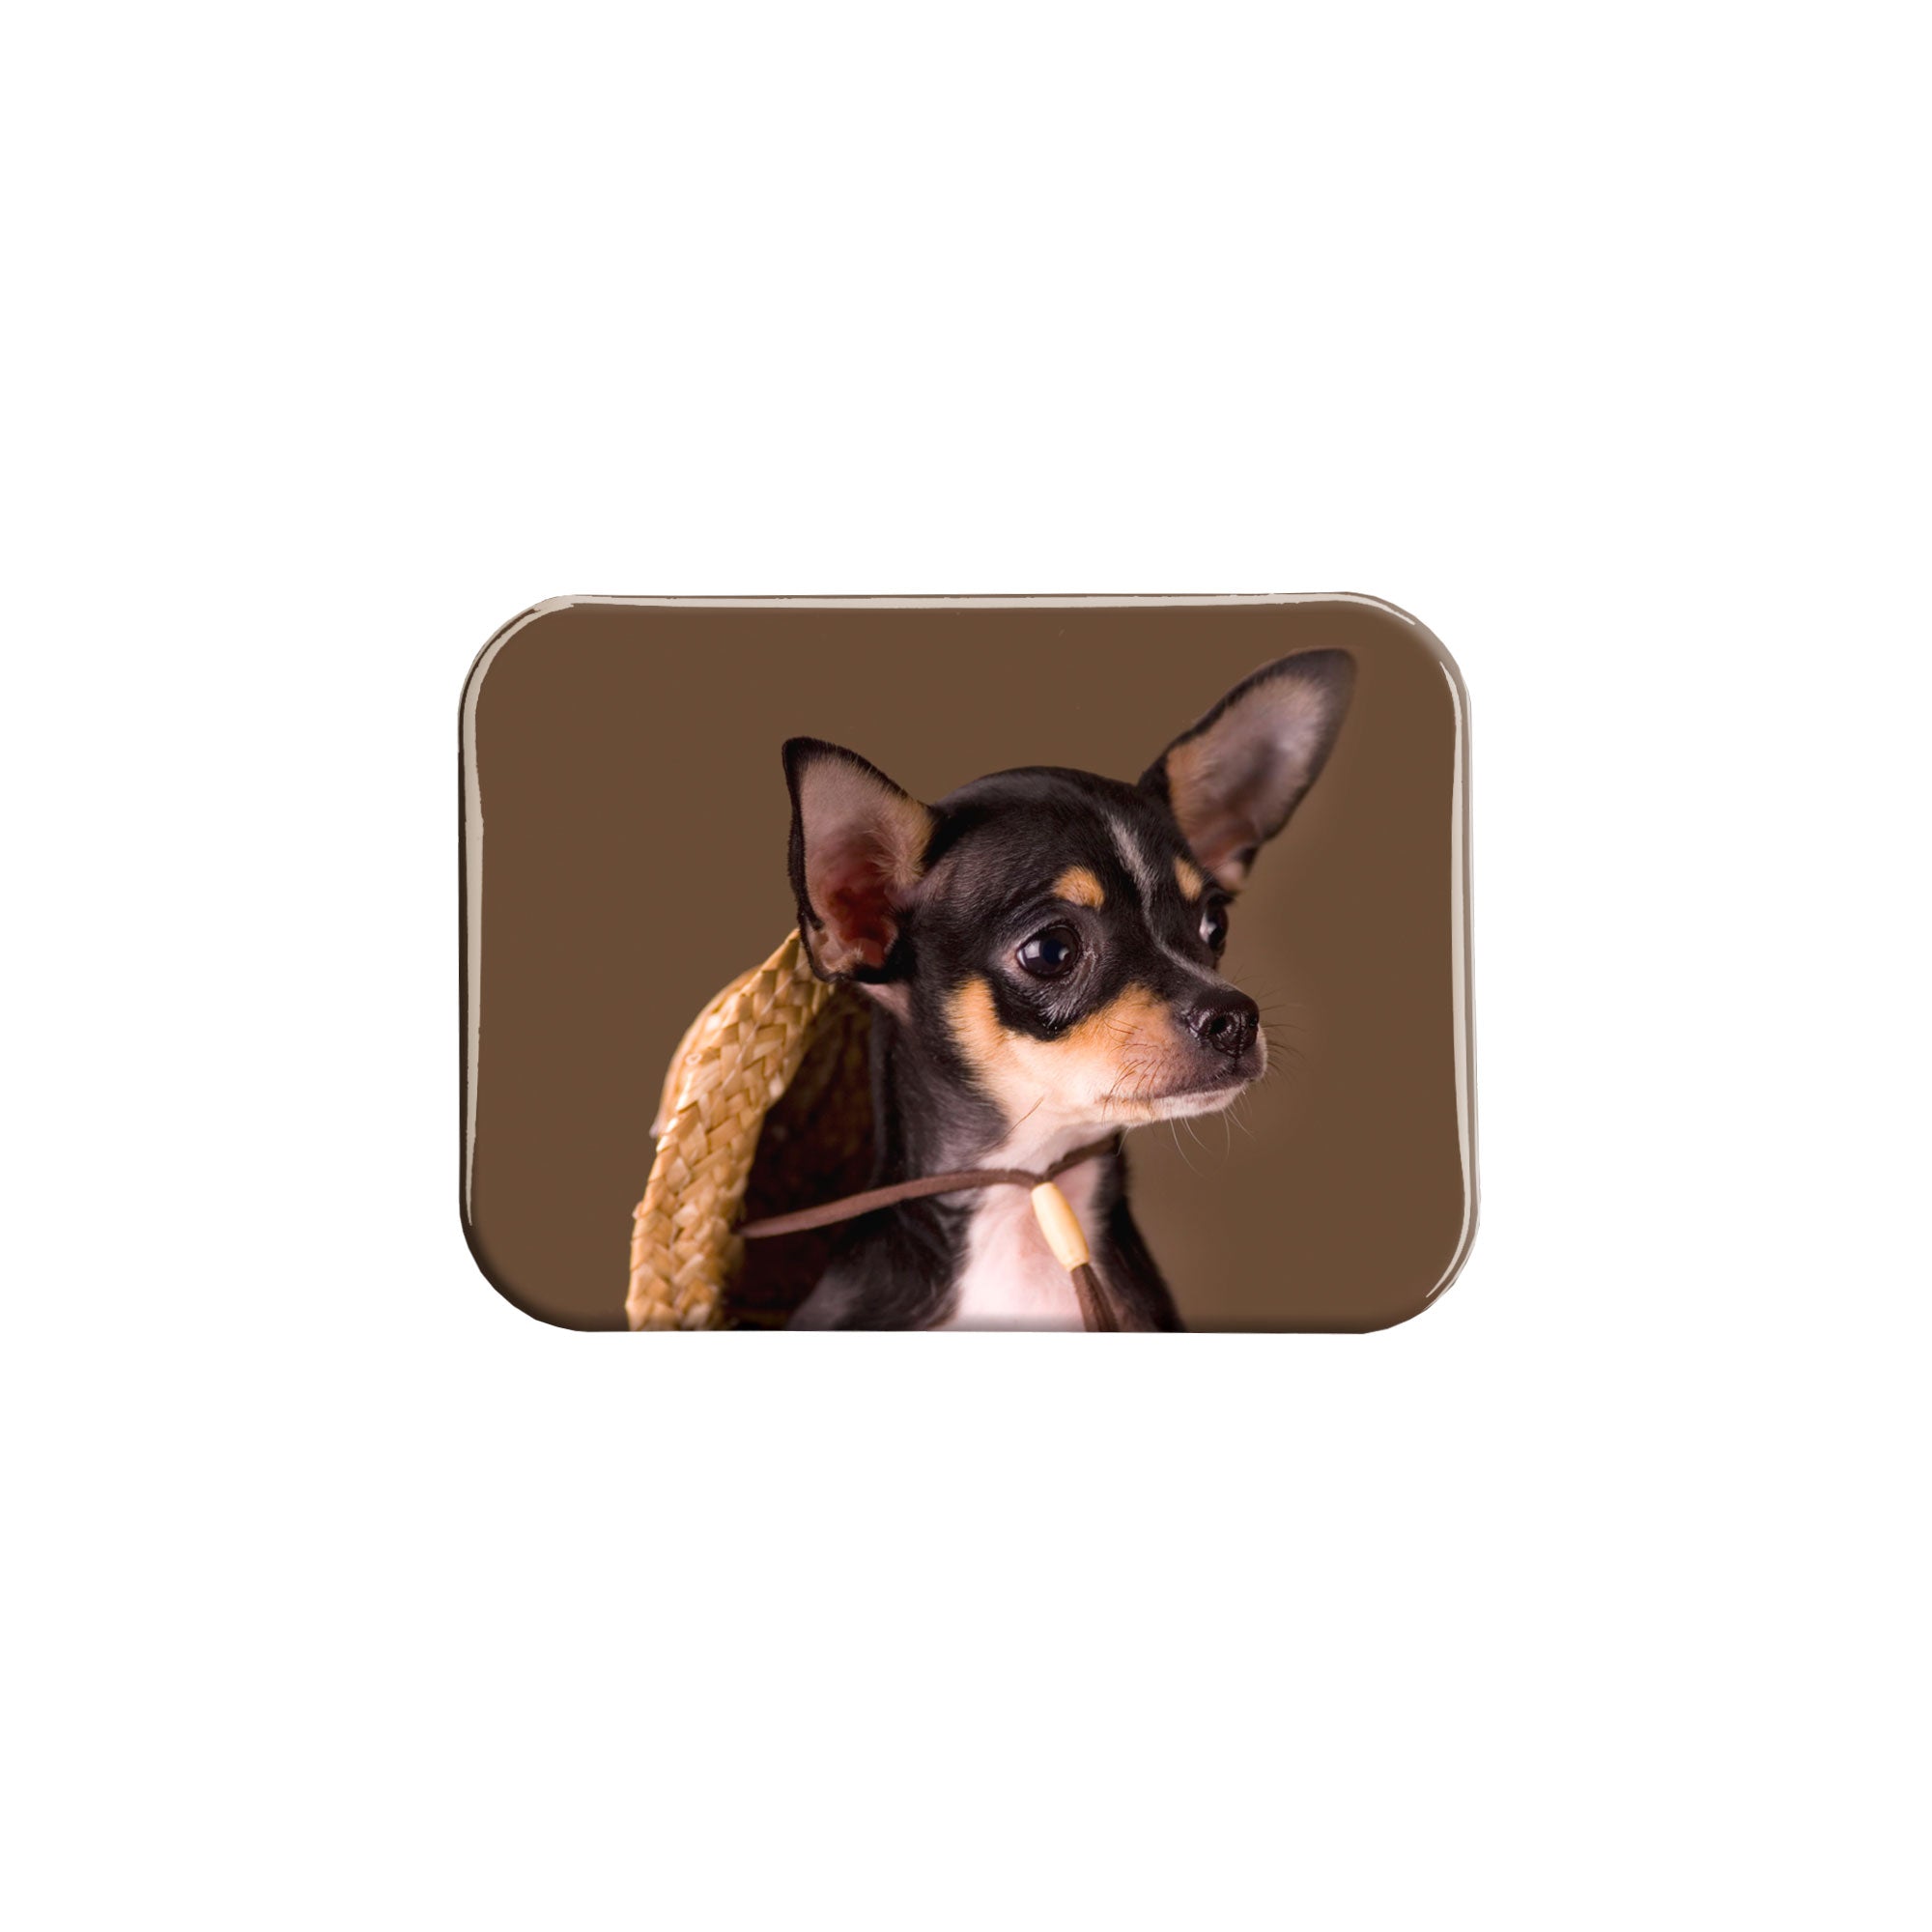 "Chihuahua with Hat" - 2.5" X 3.5" Rectangle Fridge Magnets